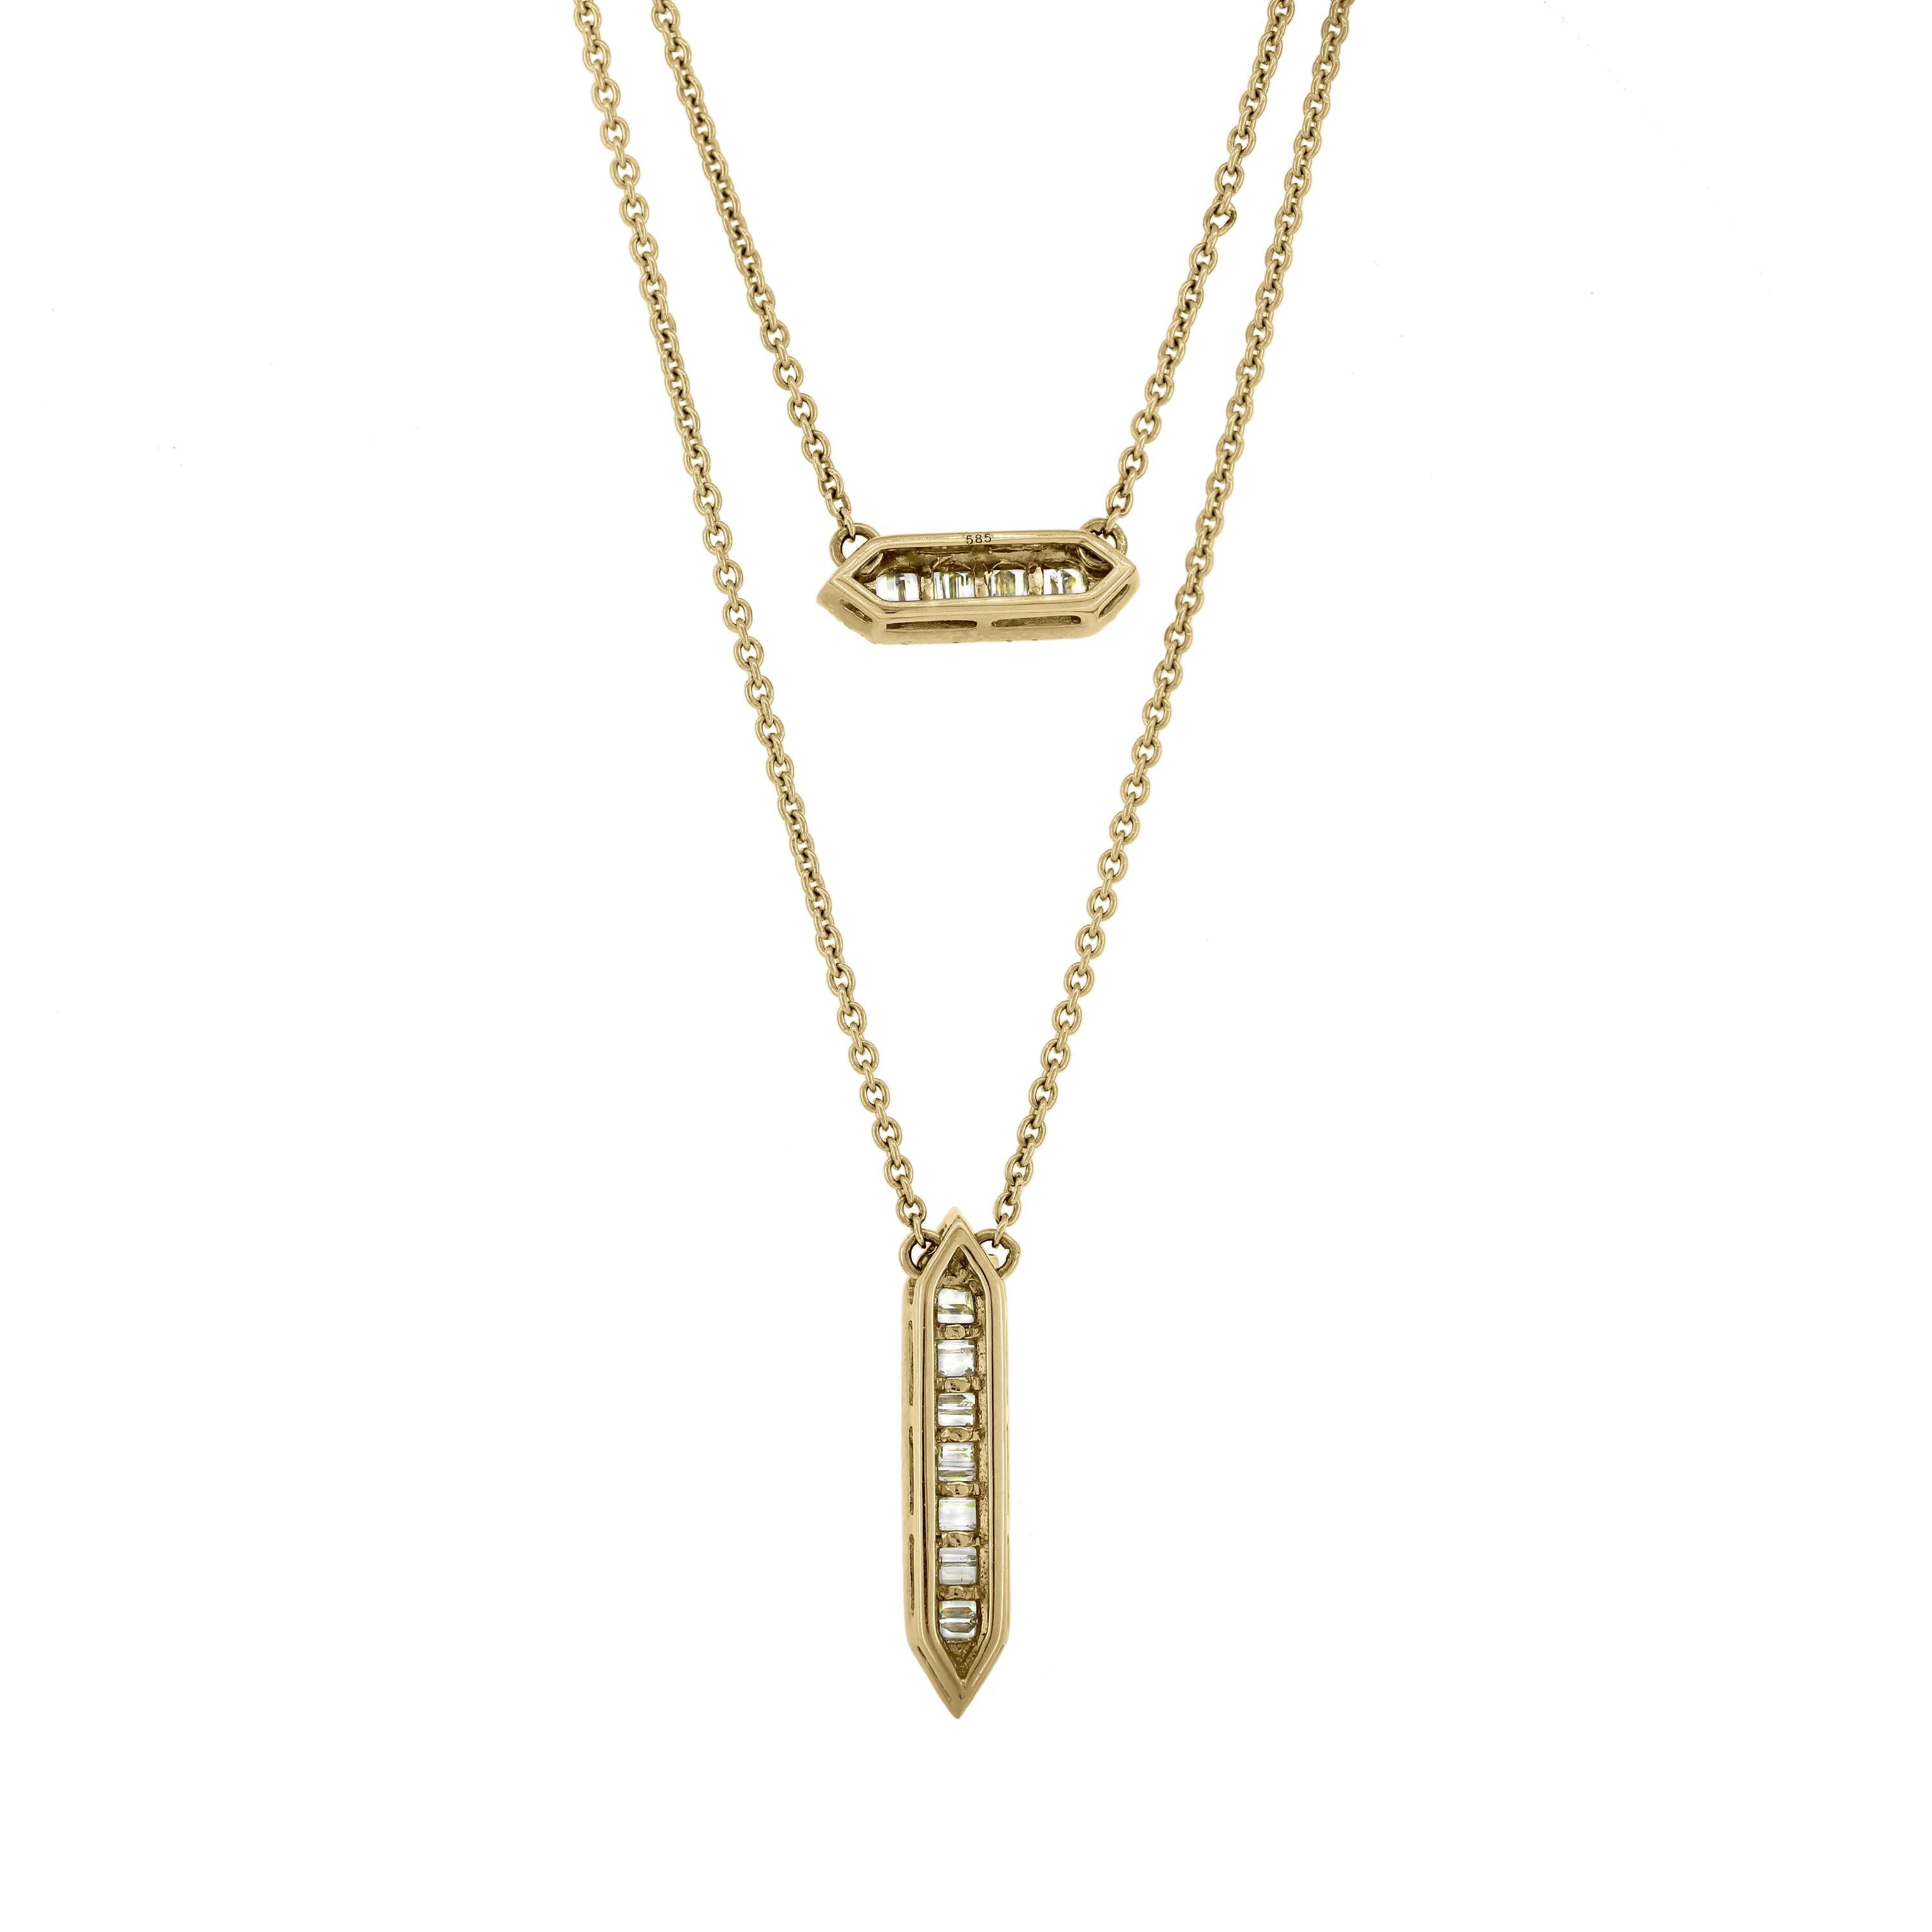 Luxle 0.65 Ct. T.W Diamond Multi Row Necklace in 14k Yellow Gold For Sale 1